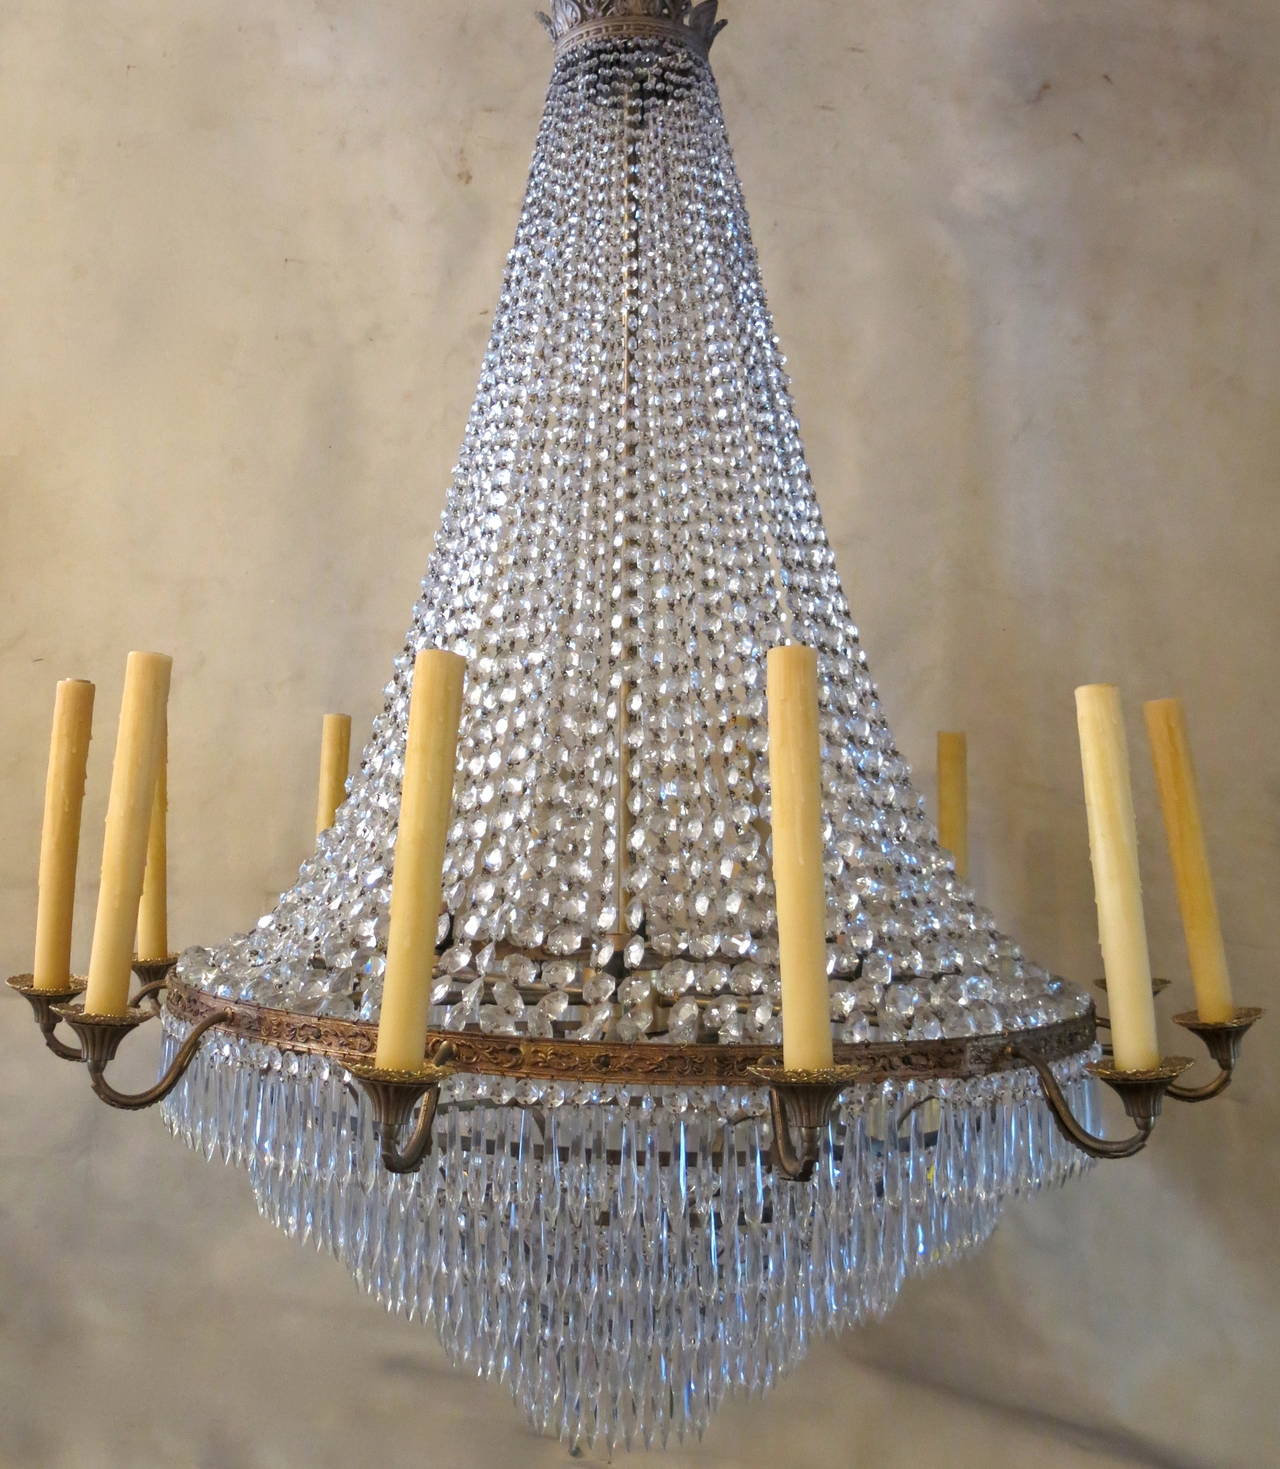 Early 20th century French Empire / Napoleon III bronze and crystal chandelier.